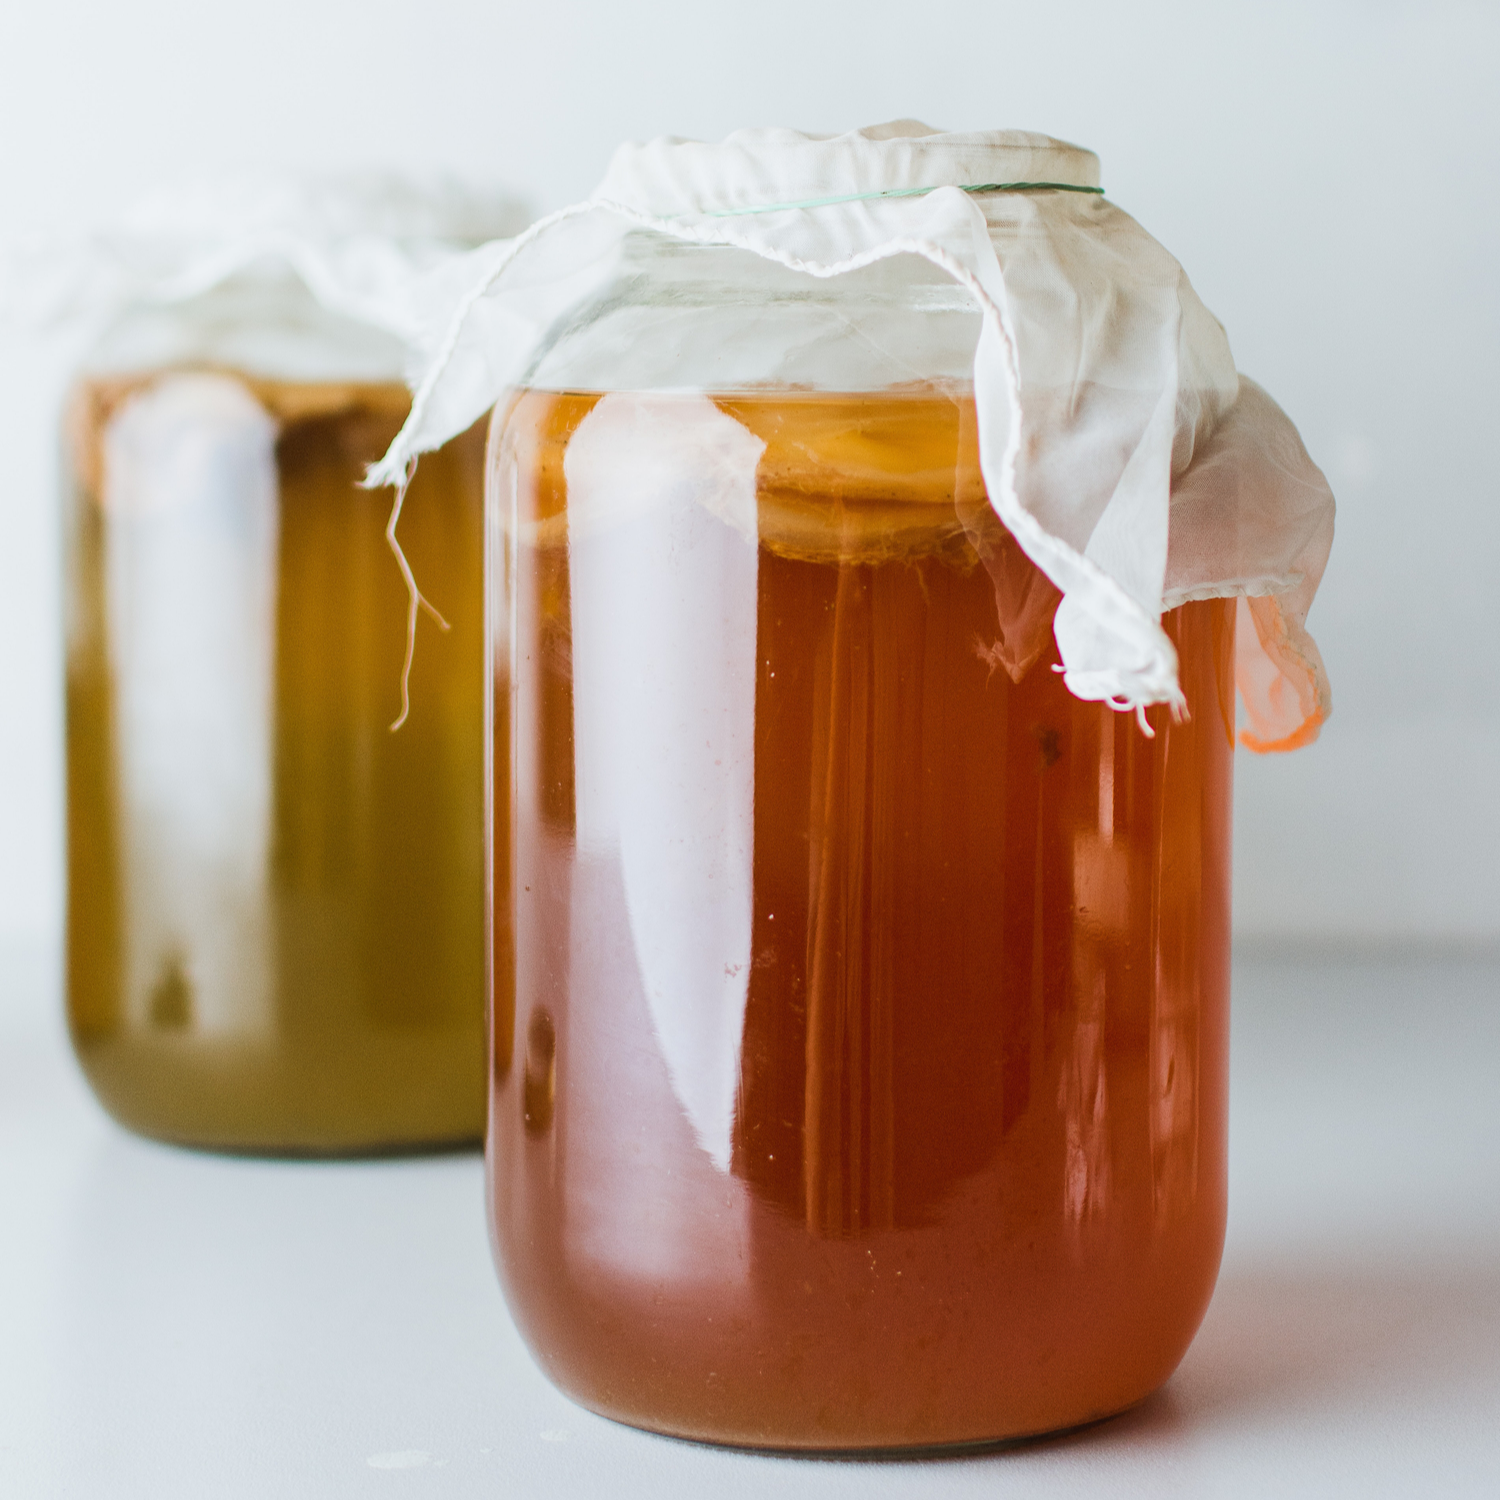 What's in a SCOBY?